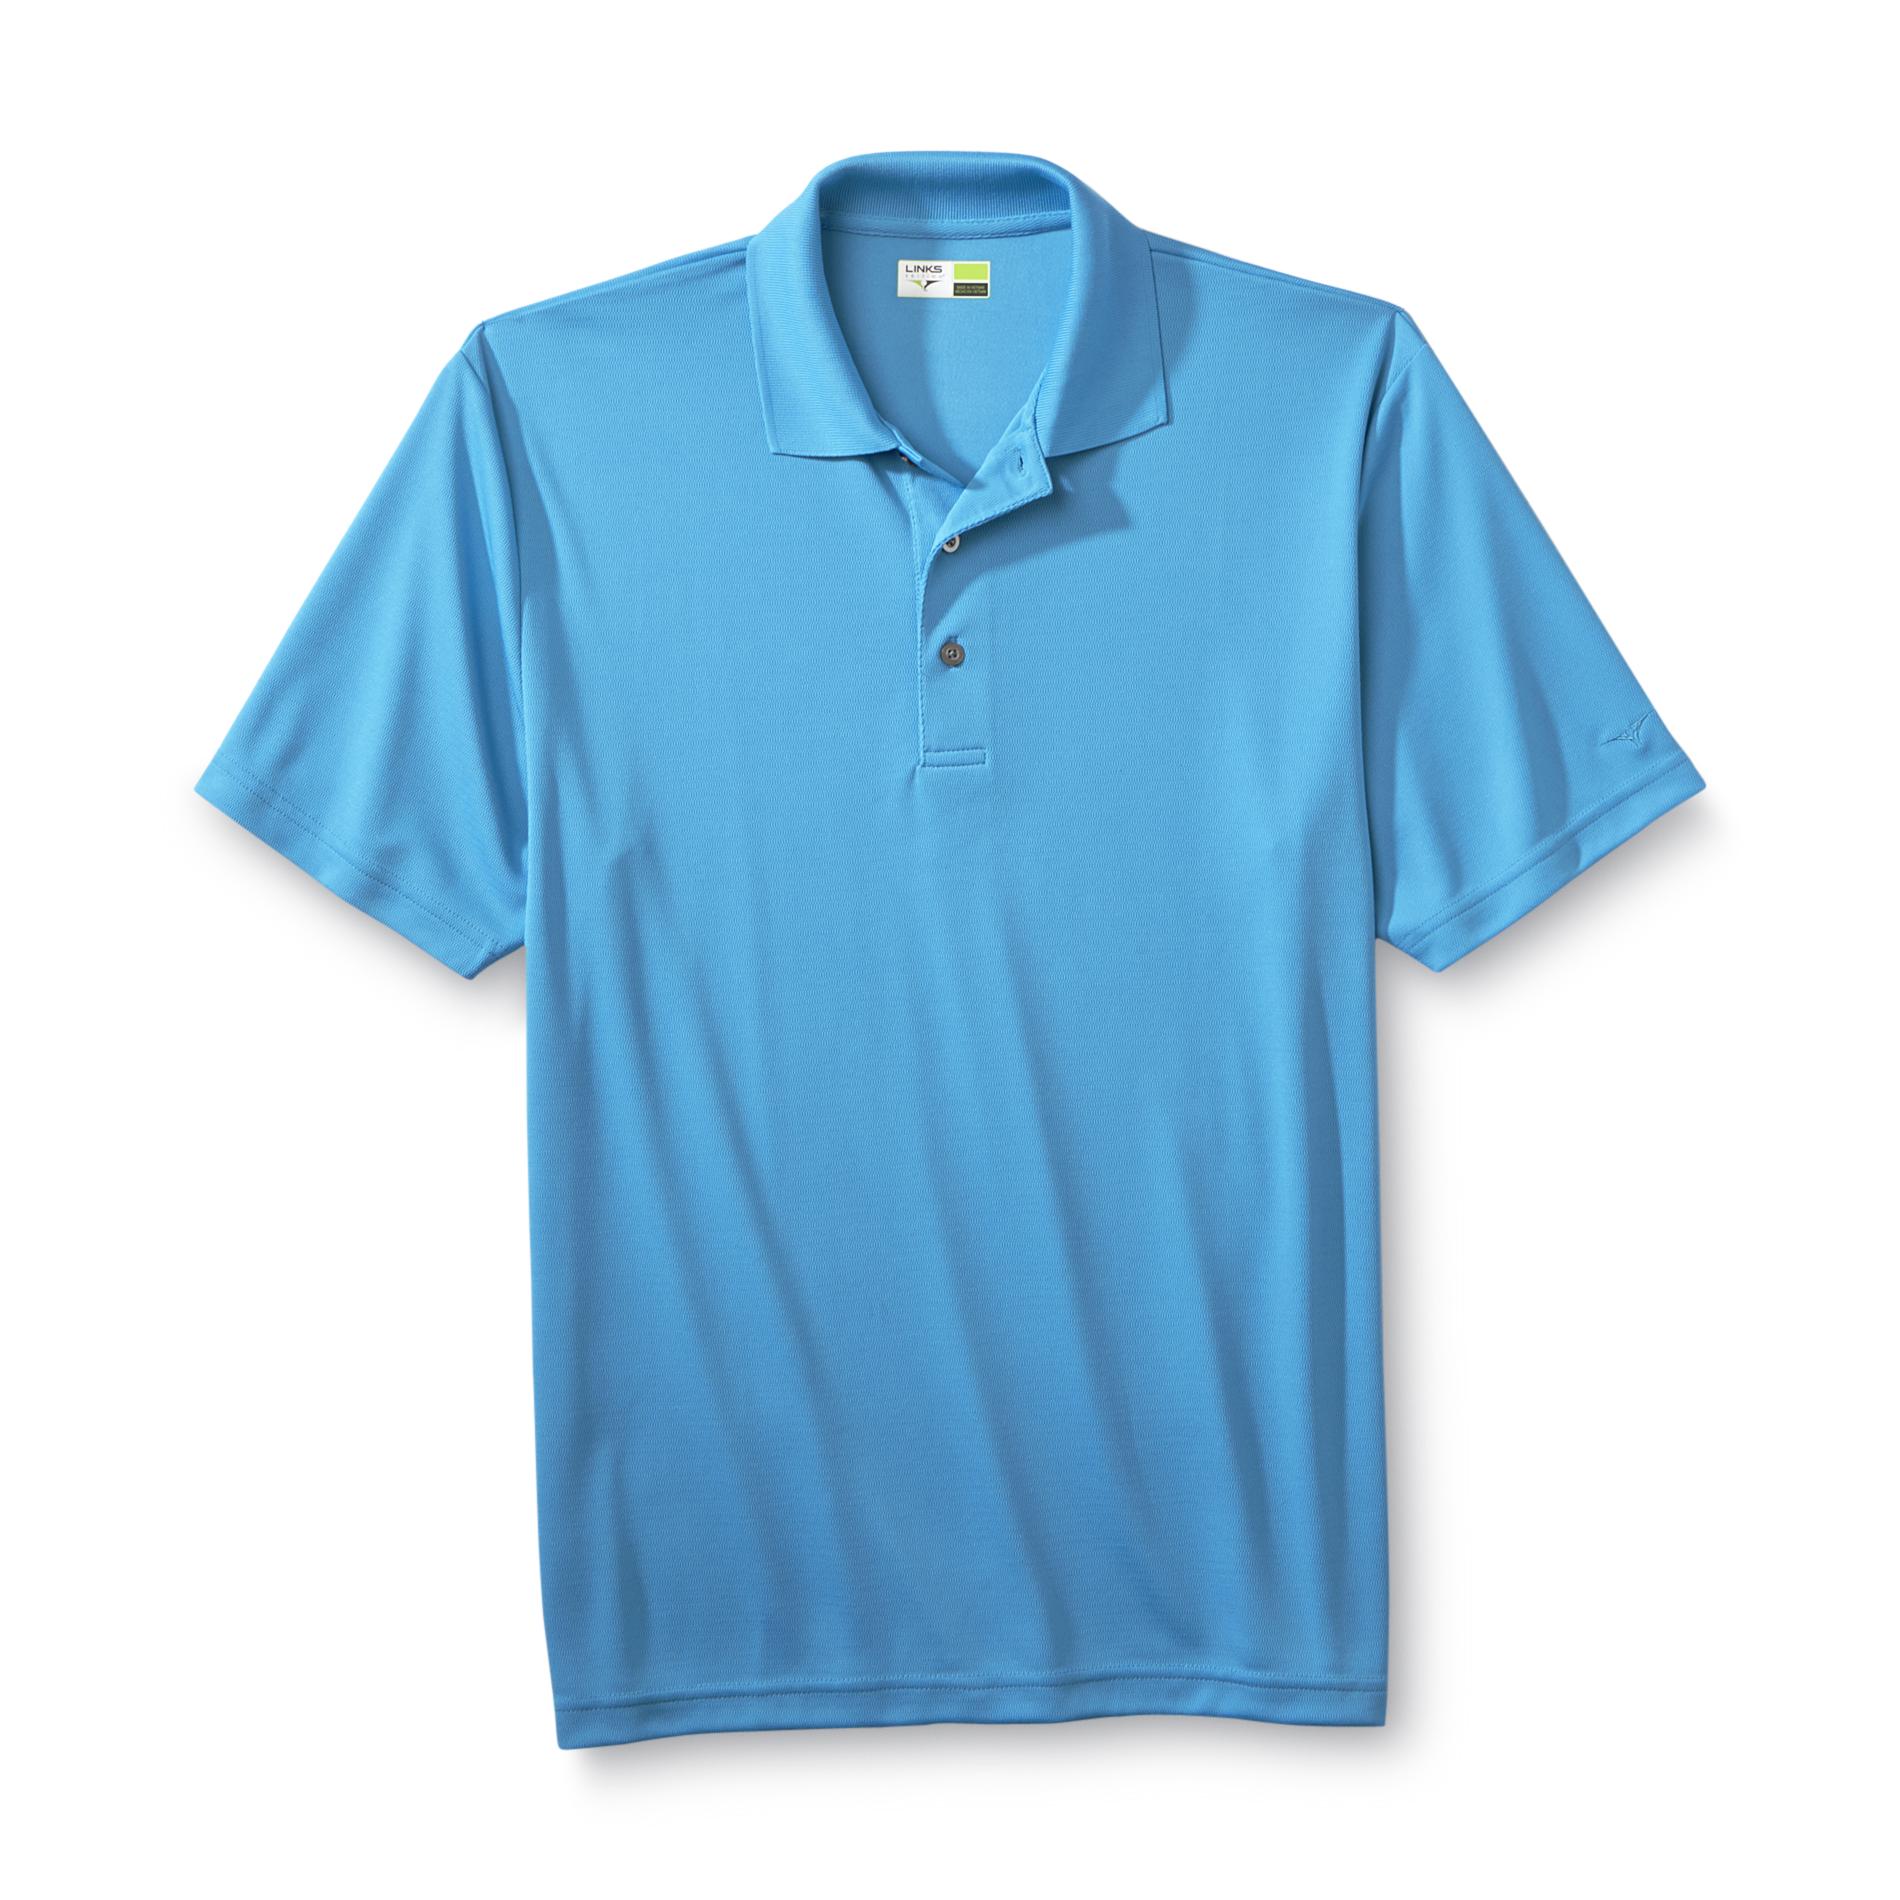 Links Edition Men's Double-Knit Polo Shirt